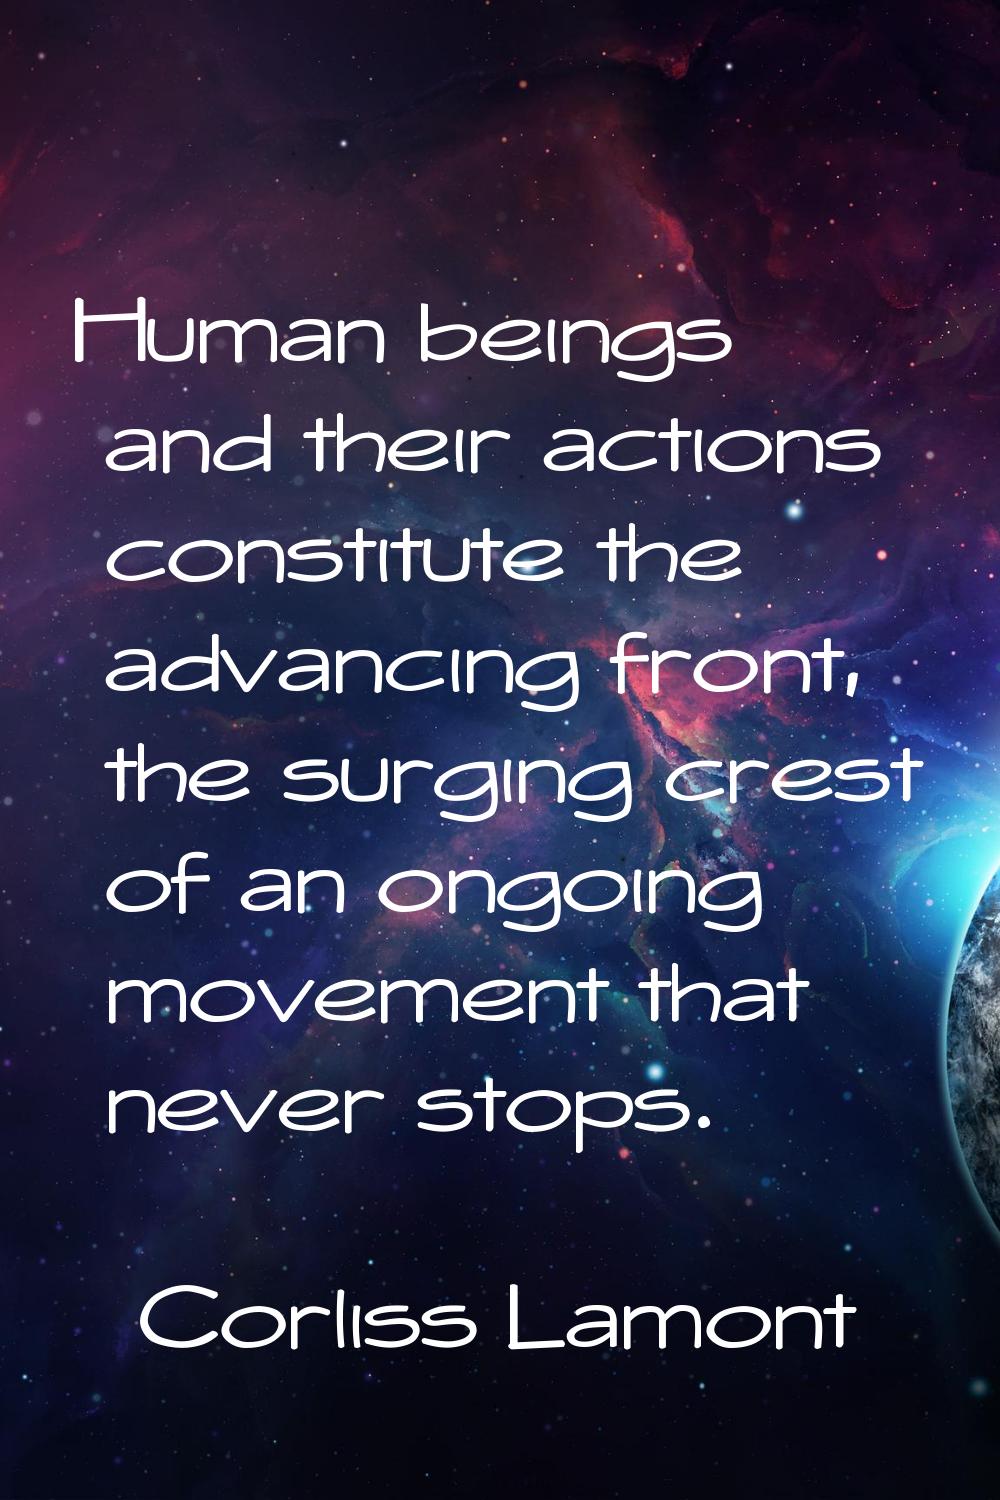 Human beings and their actions constitute the advancing front, the surging crest of an ongoing move